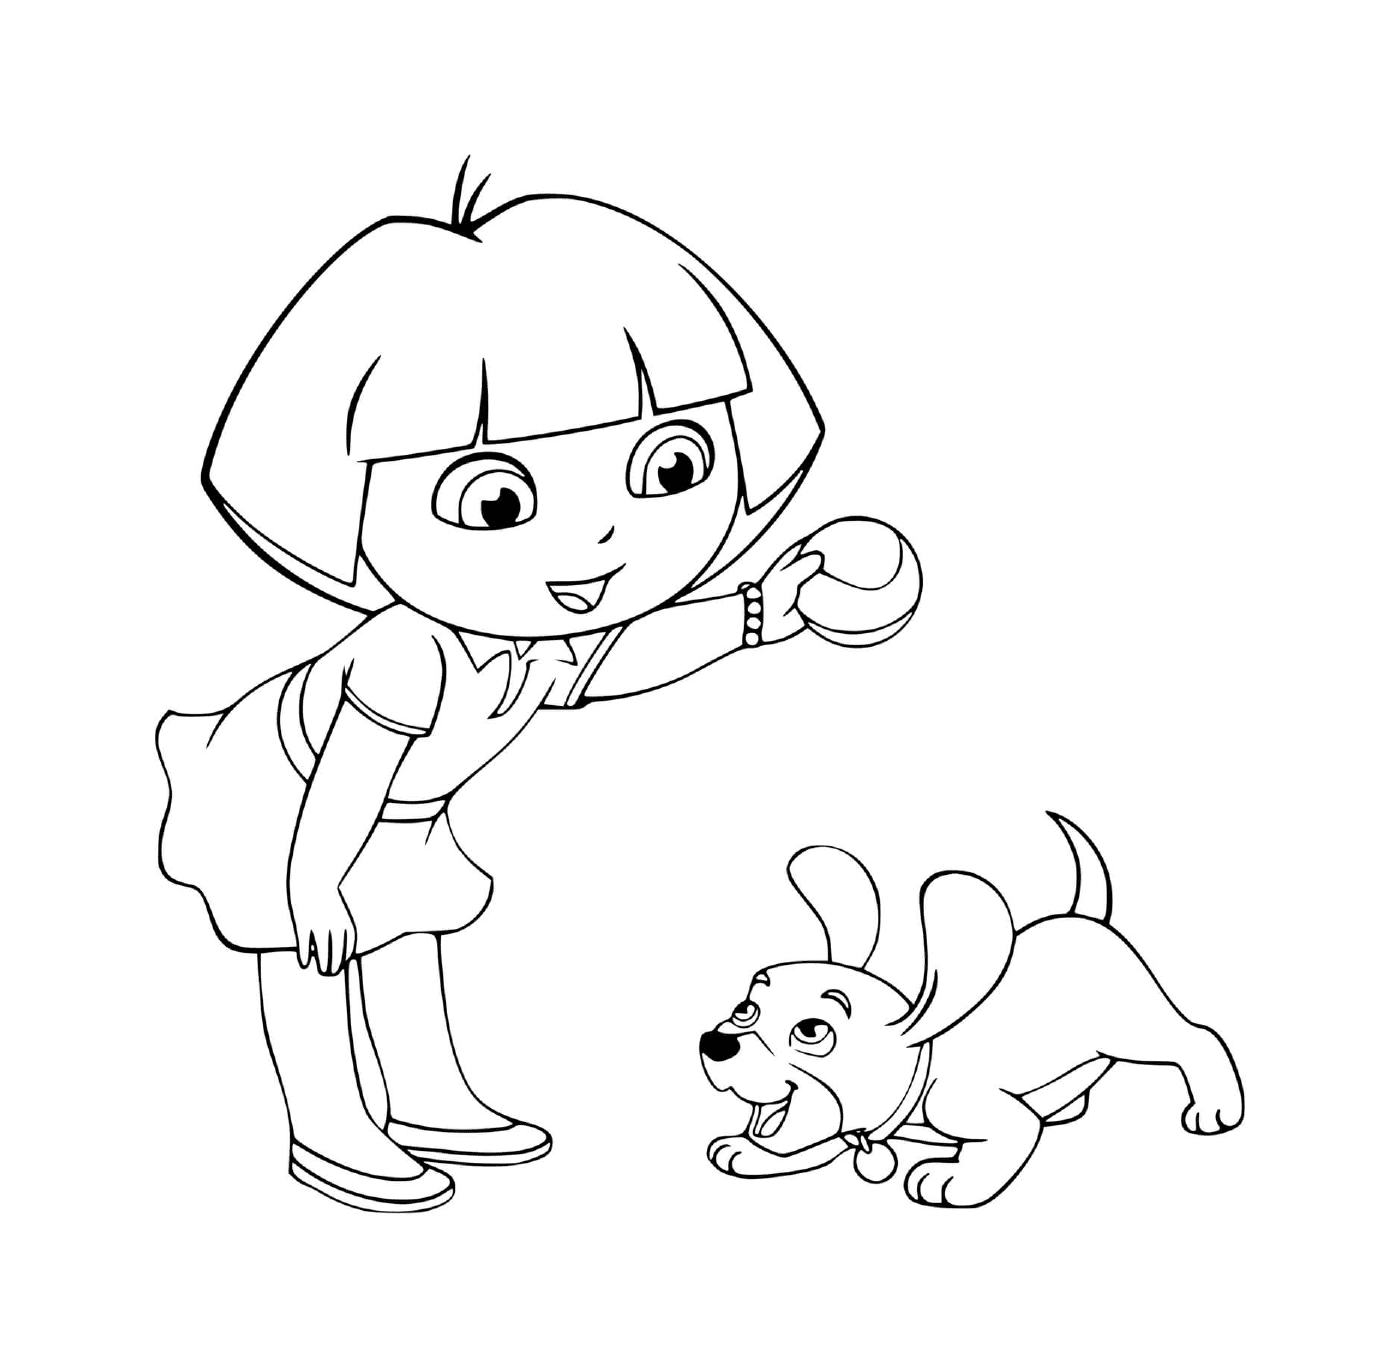  Dora plays ball with her dog with joy 